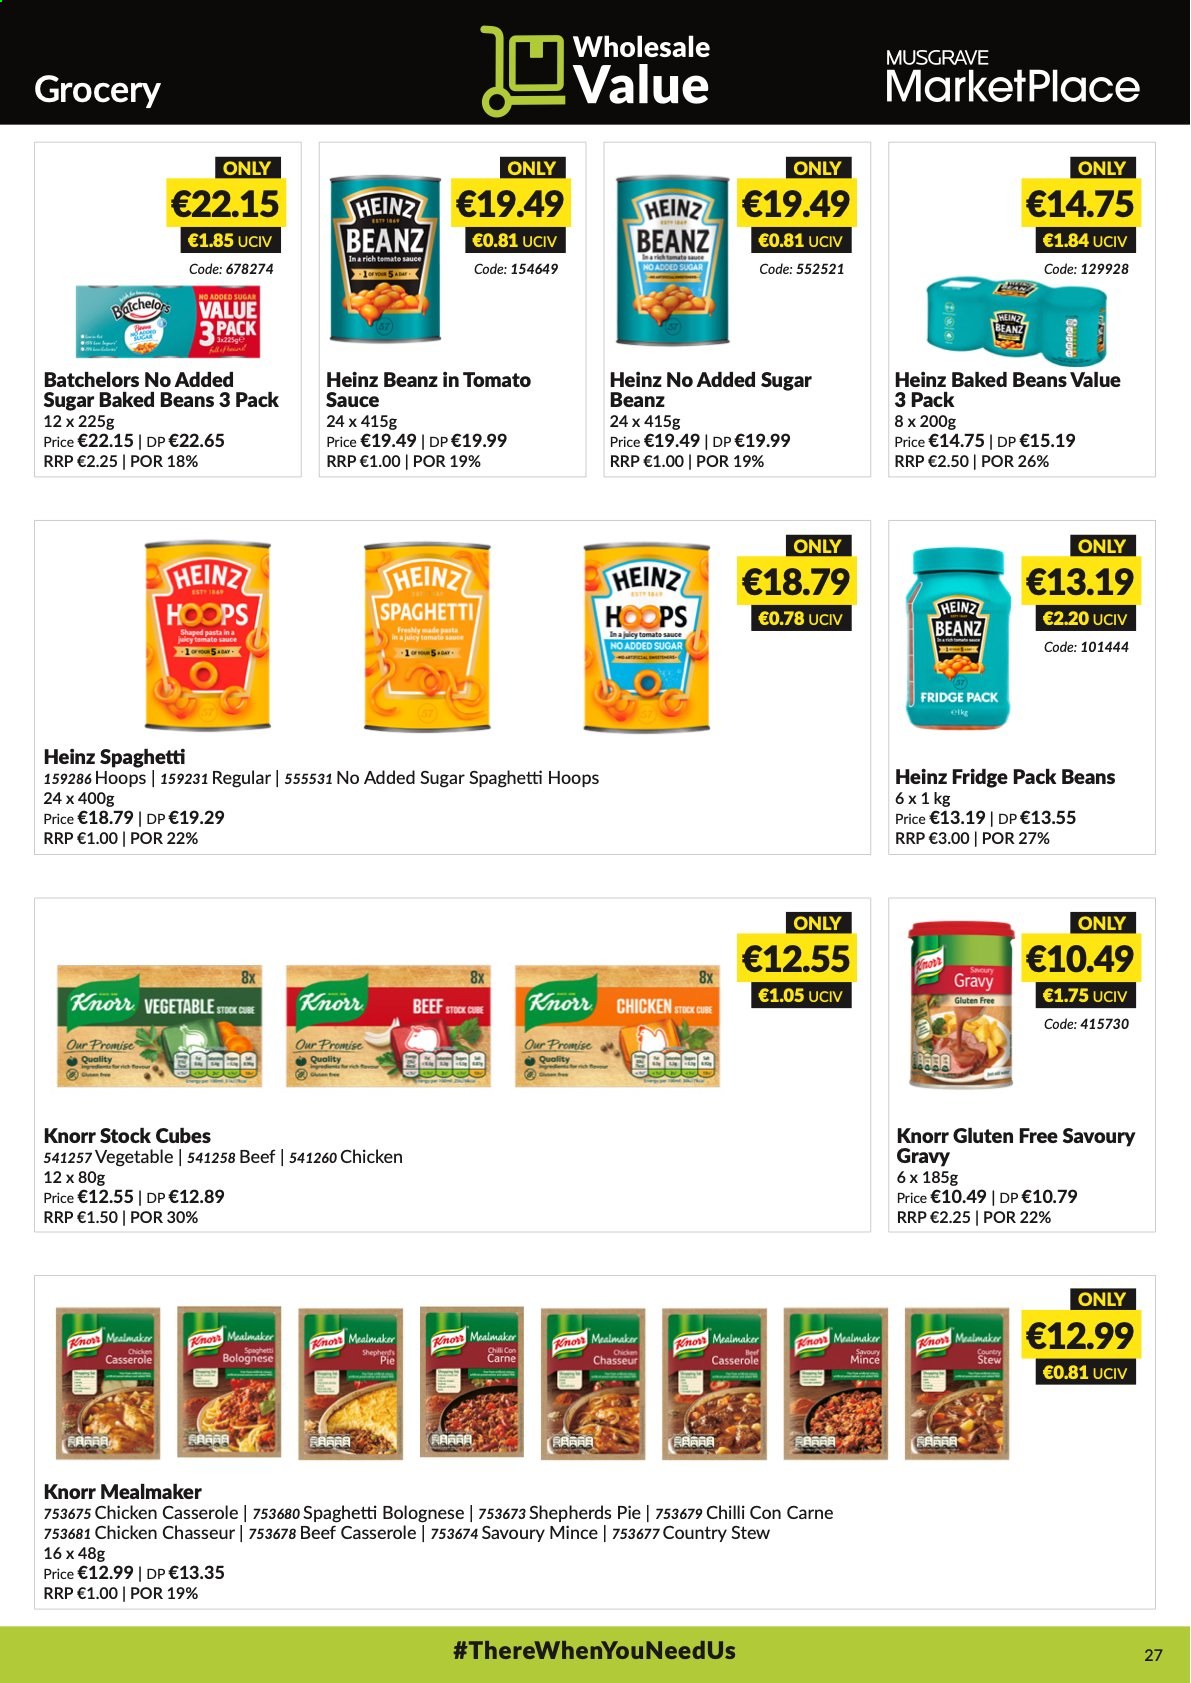 thumbnail - MUSGRAVE Market Place offer  - 29.08.2021 - 25.09.2021 - Sales products - beans, spaghetti, vegetable stock, Knorr, Heinz, baked beans, Ron Pelicano, casserole. Page 27.